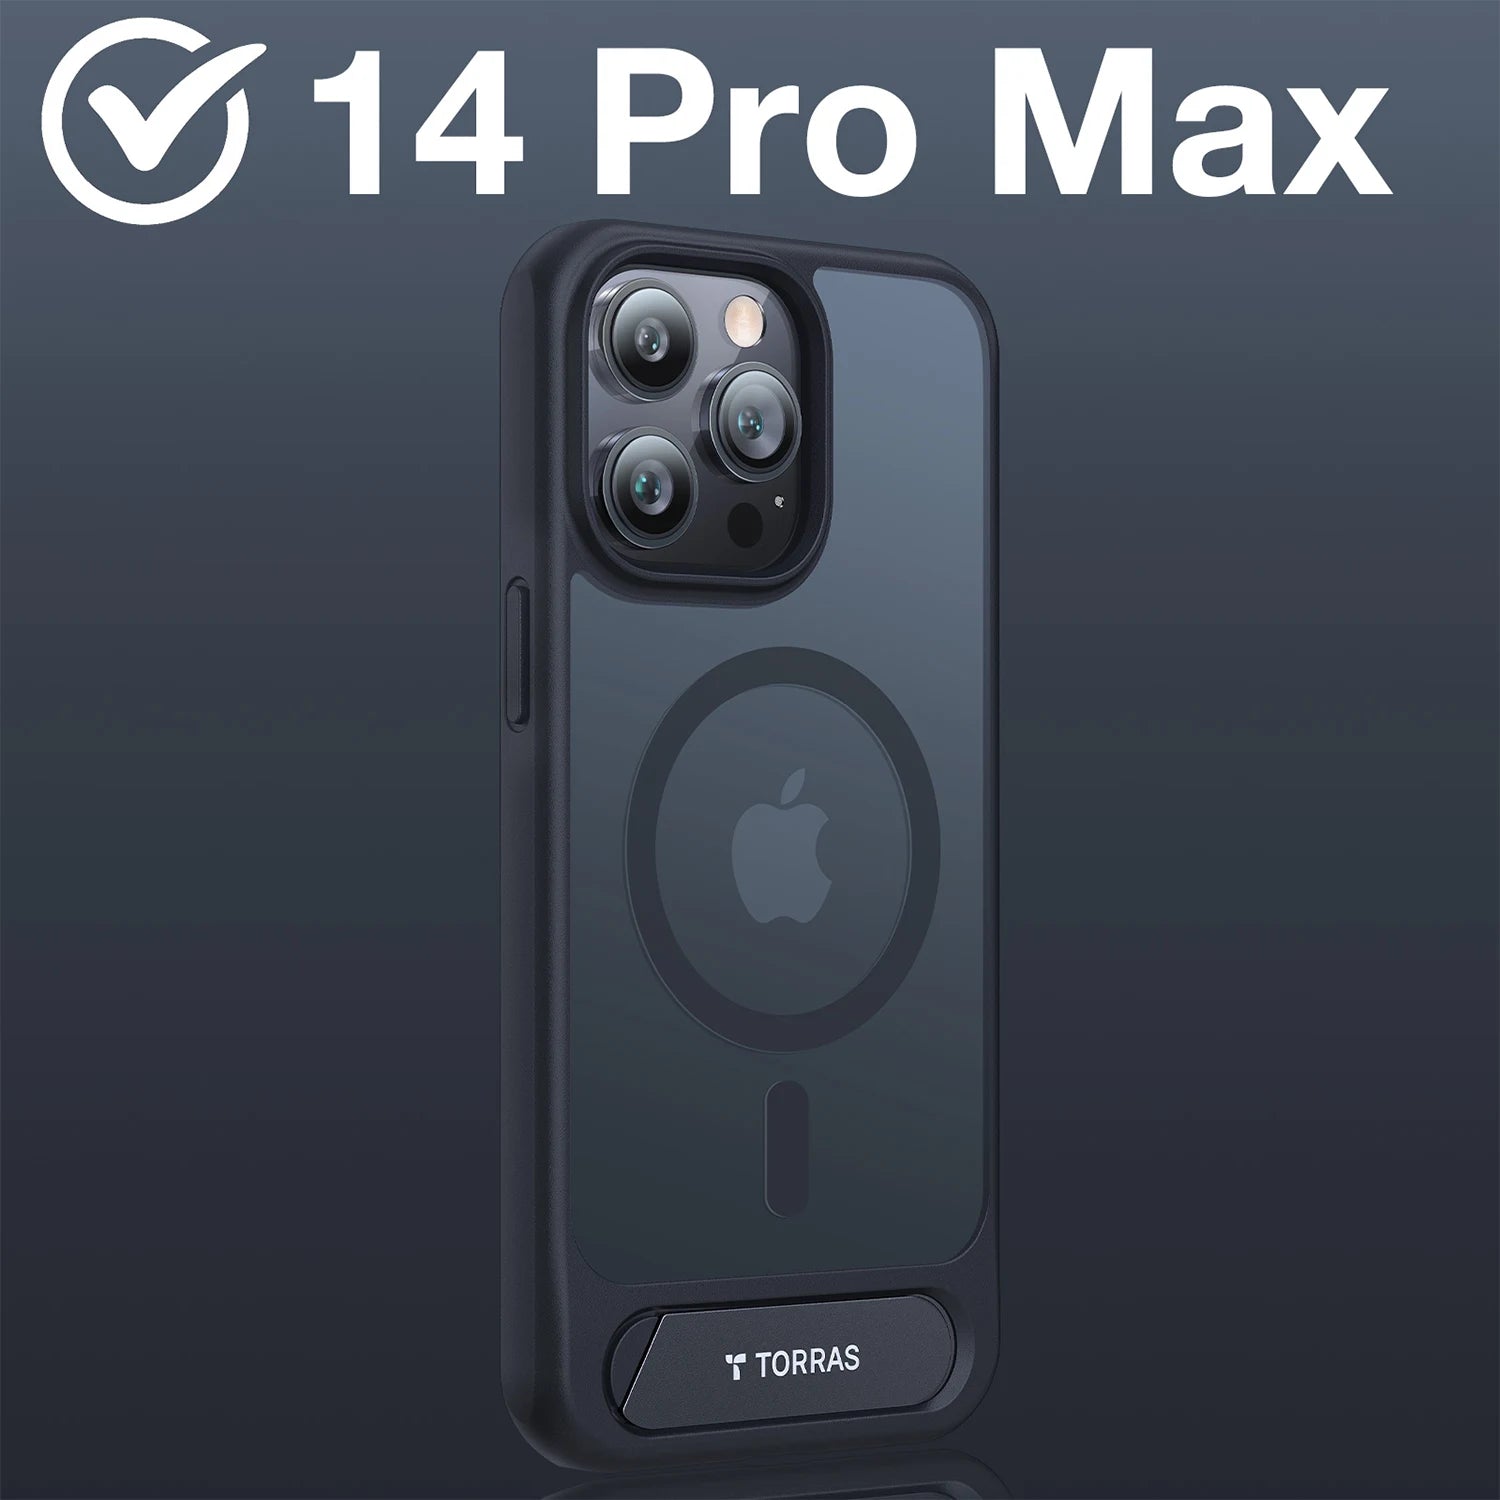 TORRAS Magnetic UPRO™ Pstand Series Case for iPhone 14 Pro Max 6.7", Black